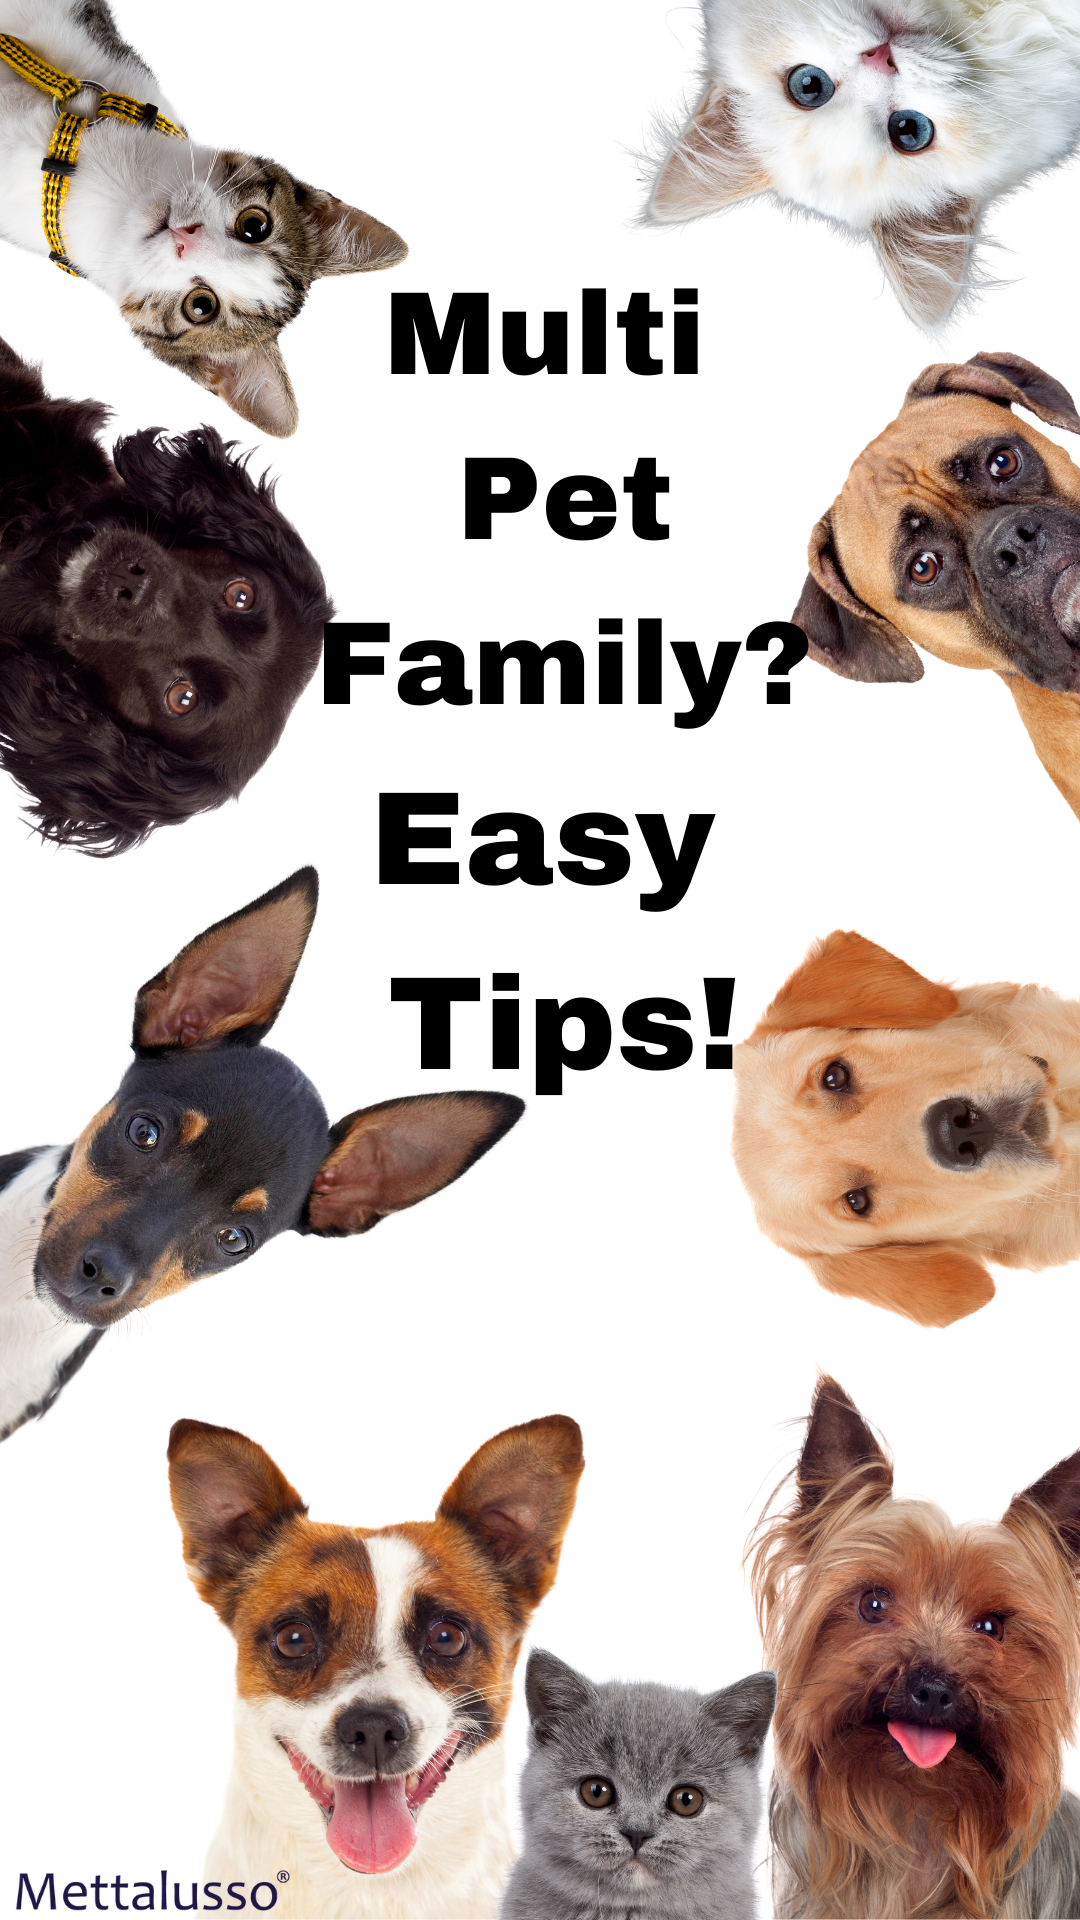 Mettalusso tips for creating a harmonious household with multiple pets